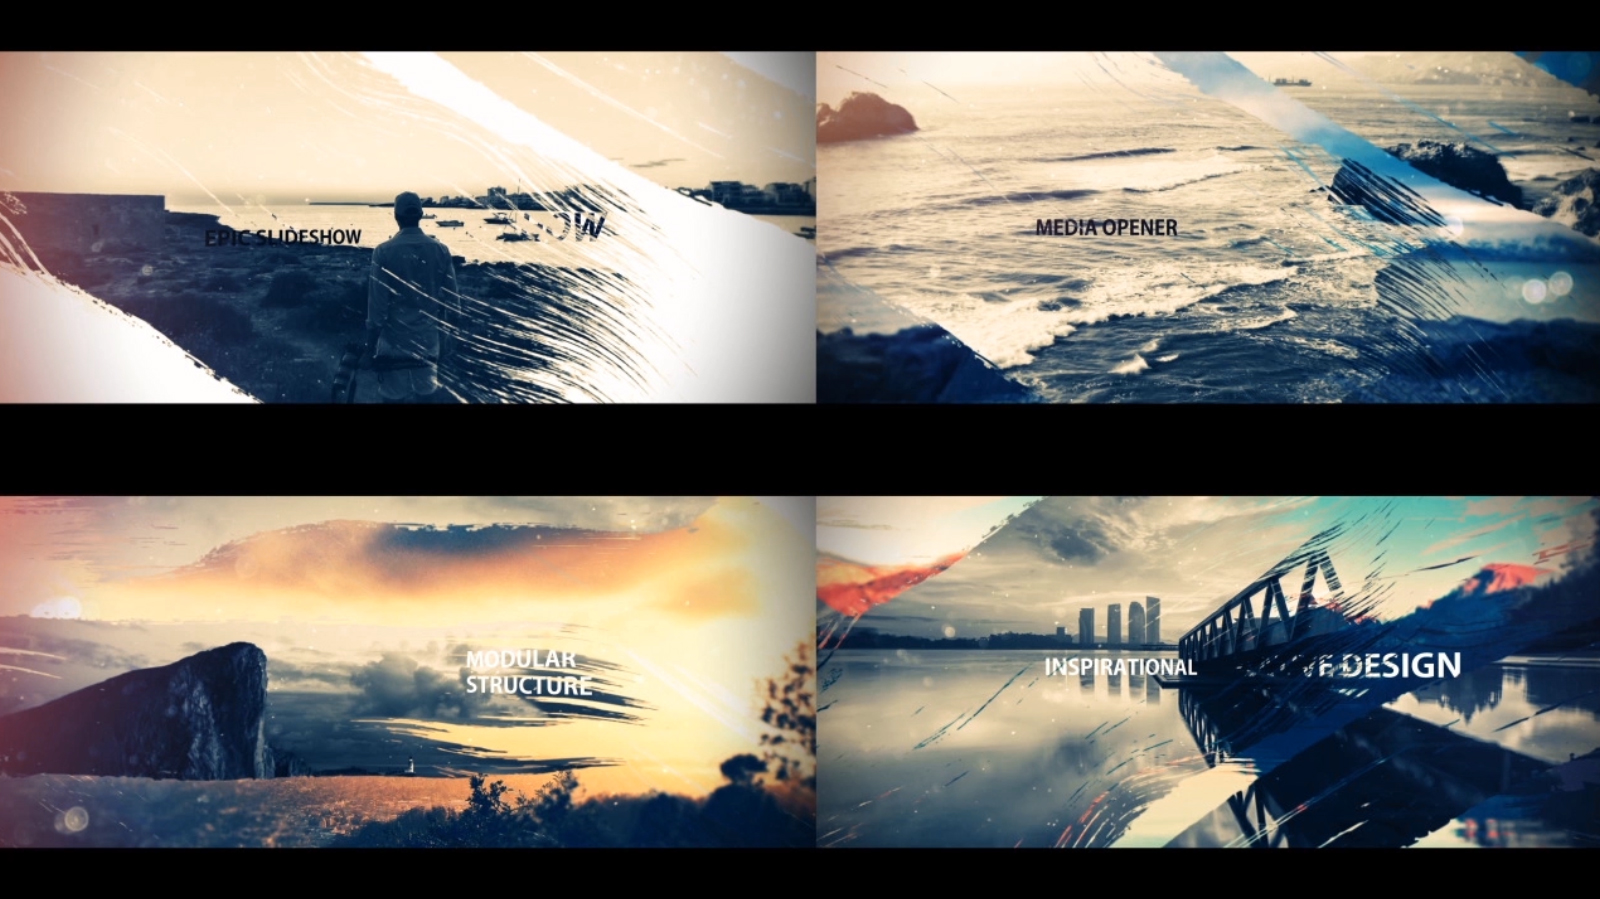 After Effects Templates